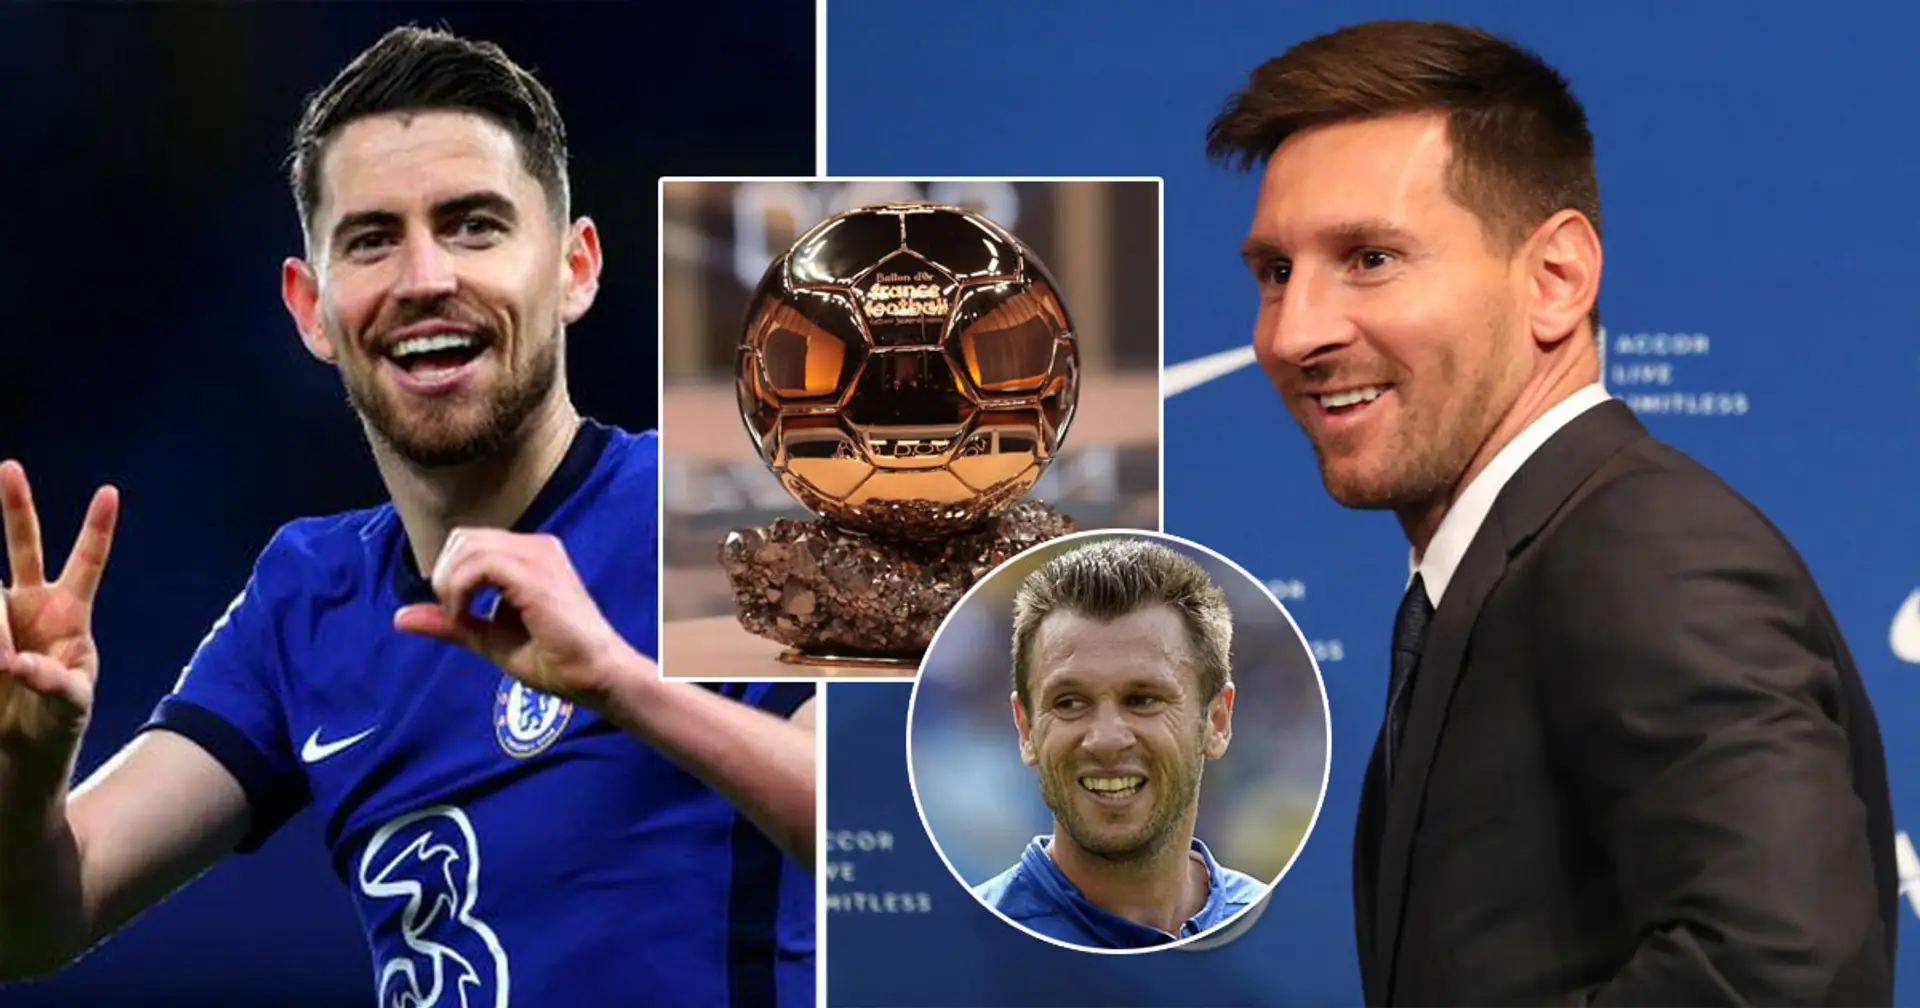 Cassano: 'Jorginho agrees it would be a scandal if he wins Ballon d'Or ahead of Messi'